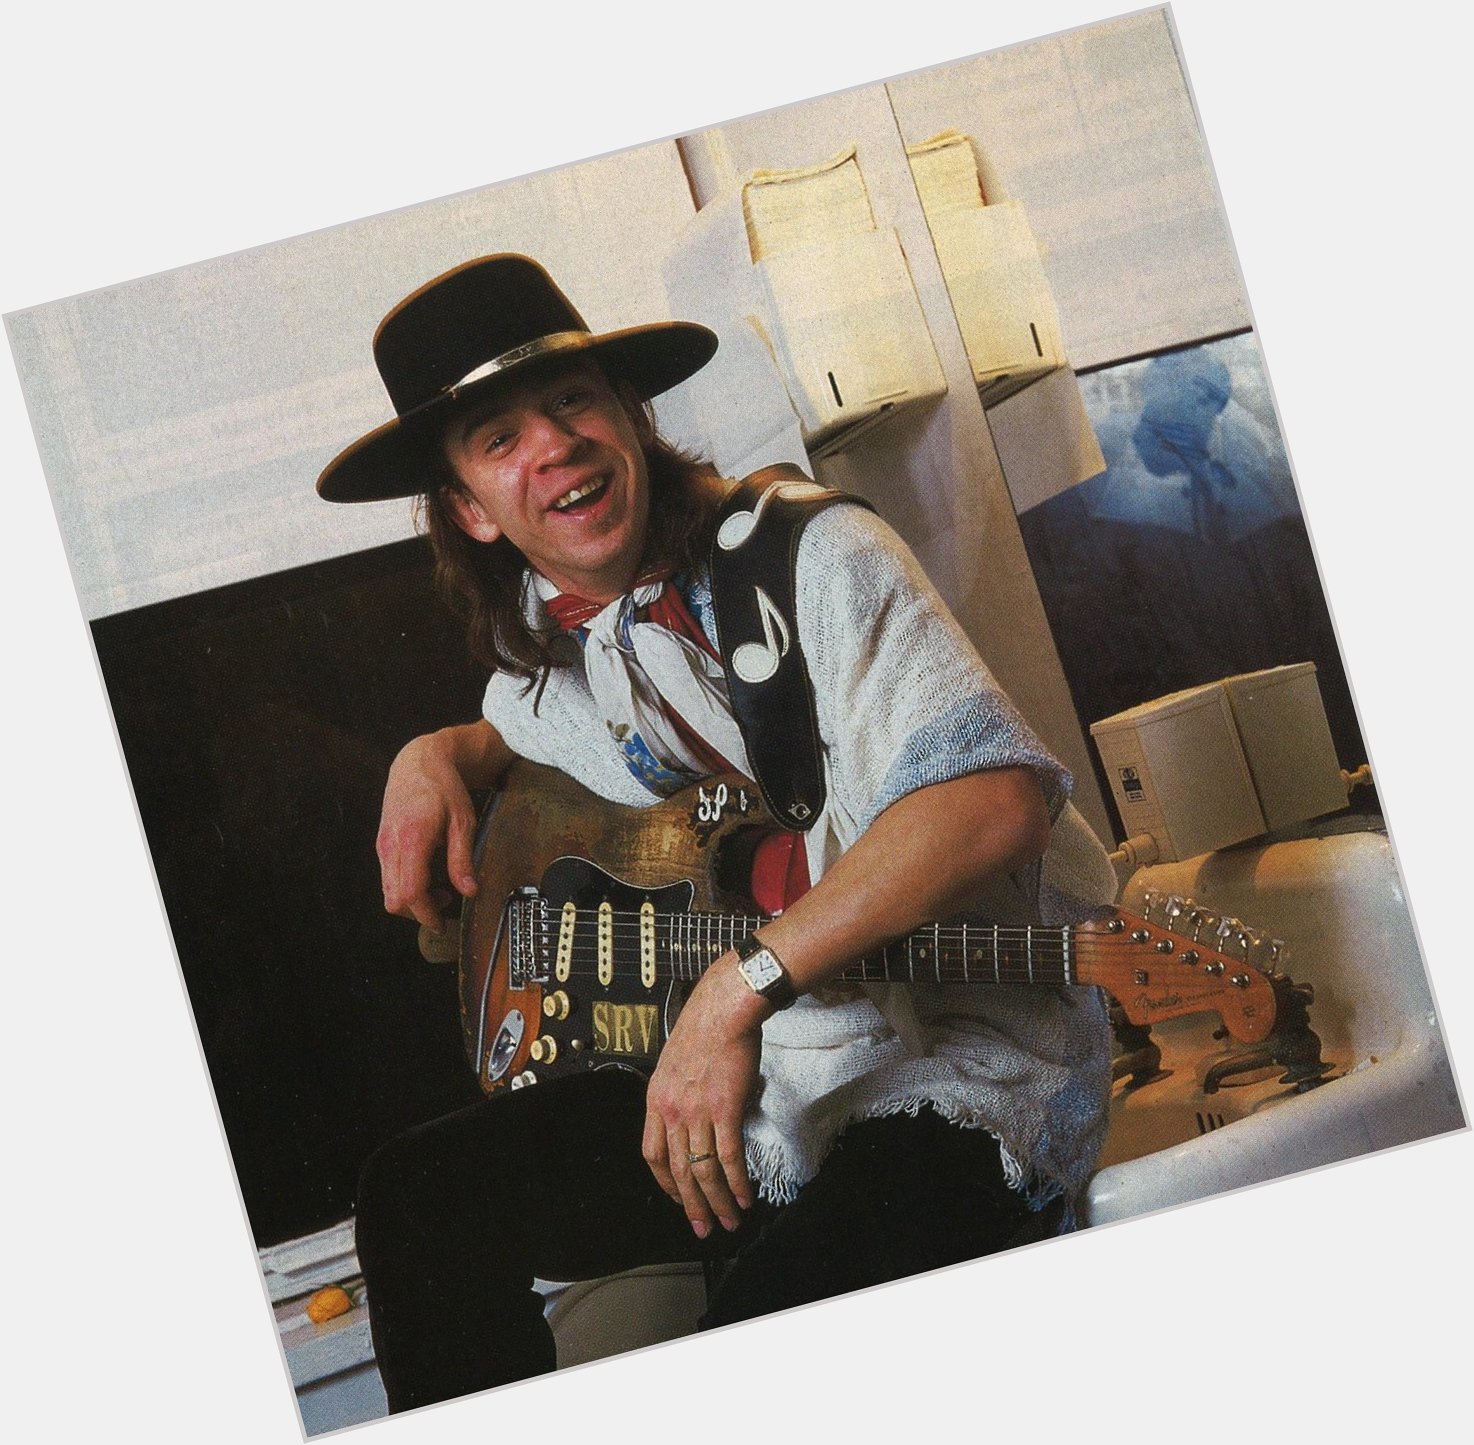 Happy birthday to late Stevie Ray Vaughan, who would have turned 67 today. 